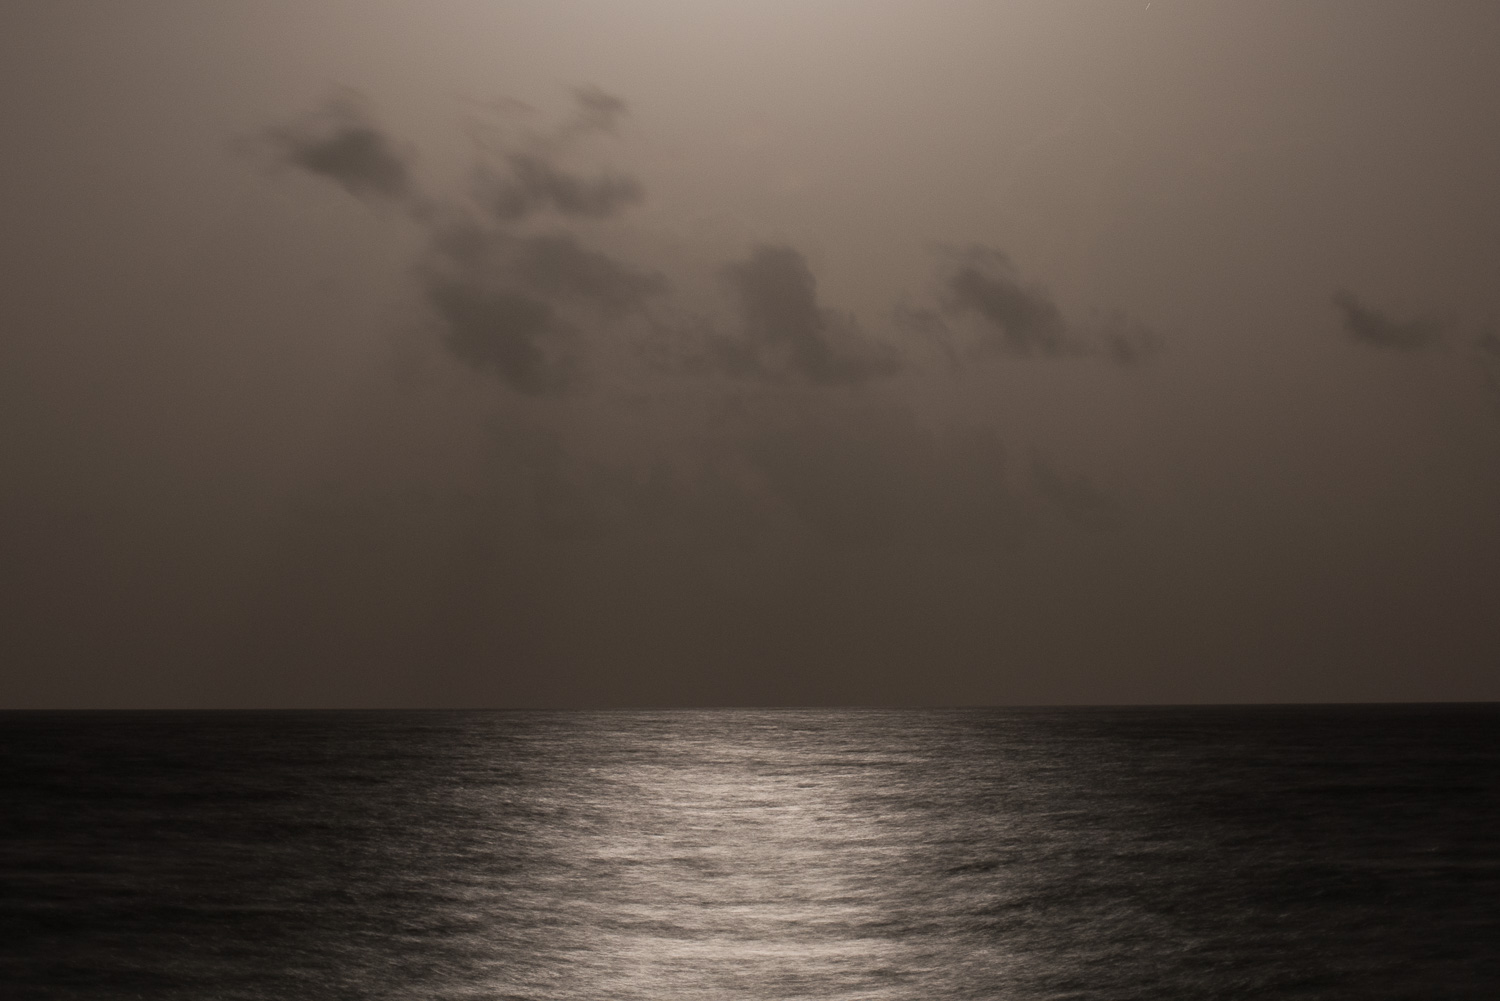  Shot in Fort Lauderdale Florida after July 4th 2015 fireworks. I love the feel of constant motion as&nbsp;the water is drawn to the full moon just above the crop.&nbsp; 